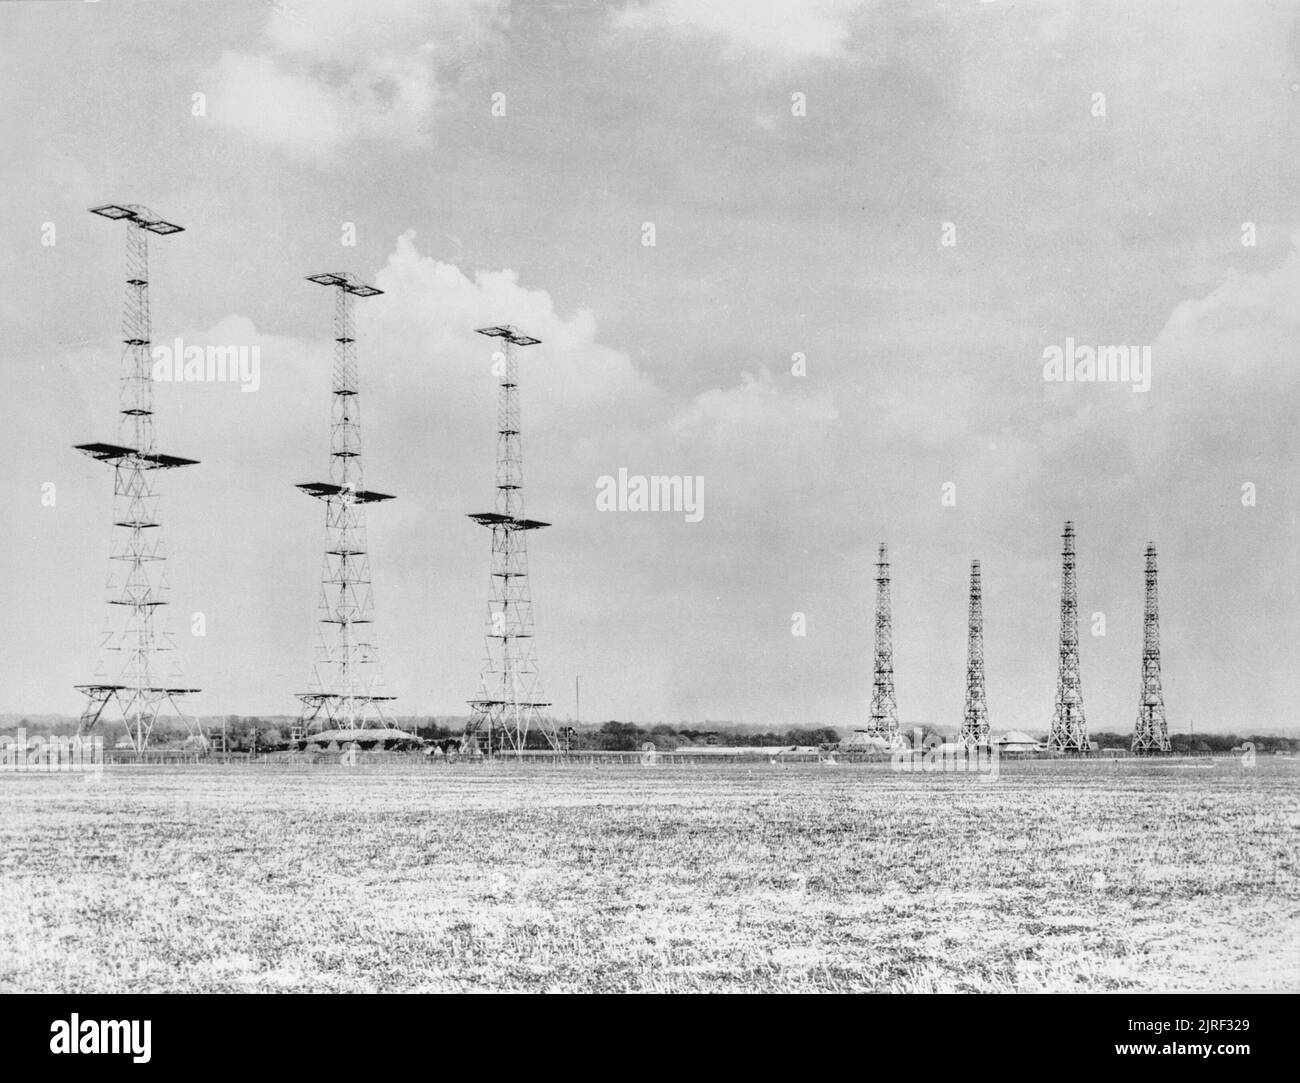 Chain Home radar installation at Poling, Sussex, 1945. Chain Home: AMES Type 1 CH East Coast radar installation at Poling, Sussex. On the left are three (originally four) in-line 360ft steel transmitter towers, between which the transmitter aerials were slung, with the heavily protected transmitter building in front. On the right are four 240ft wooden receiver towers placed in rhombic formation, with the receiver building in the middle. Stock Photo